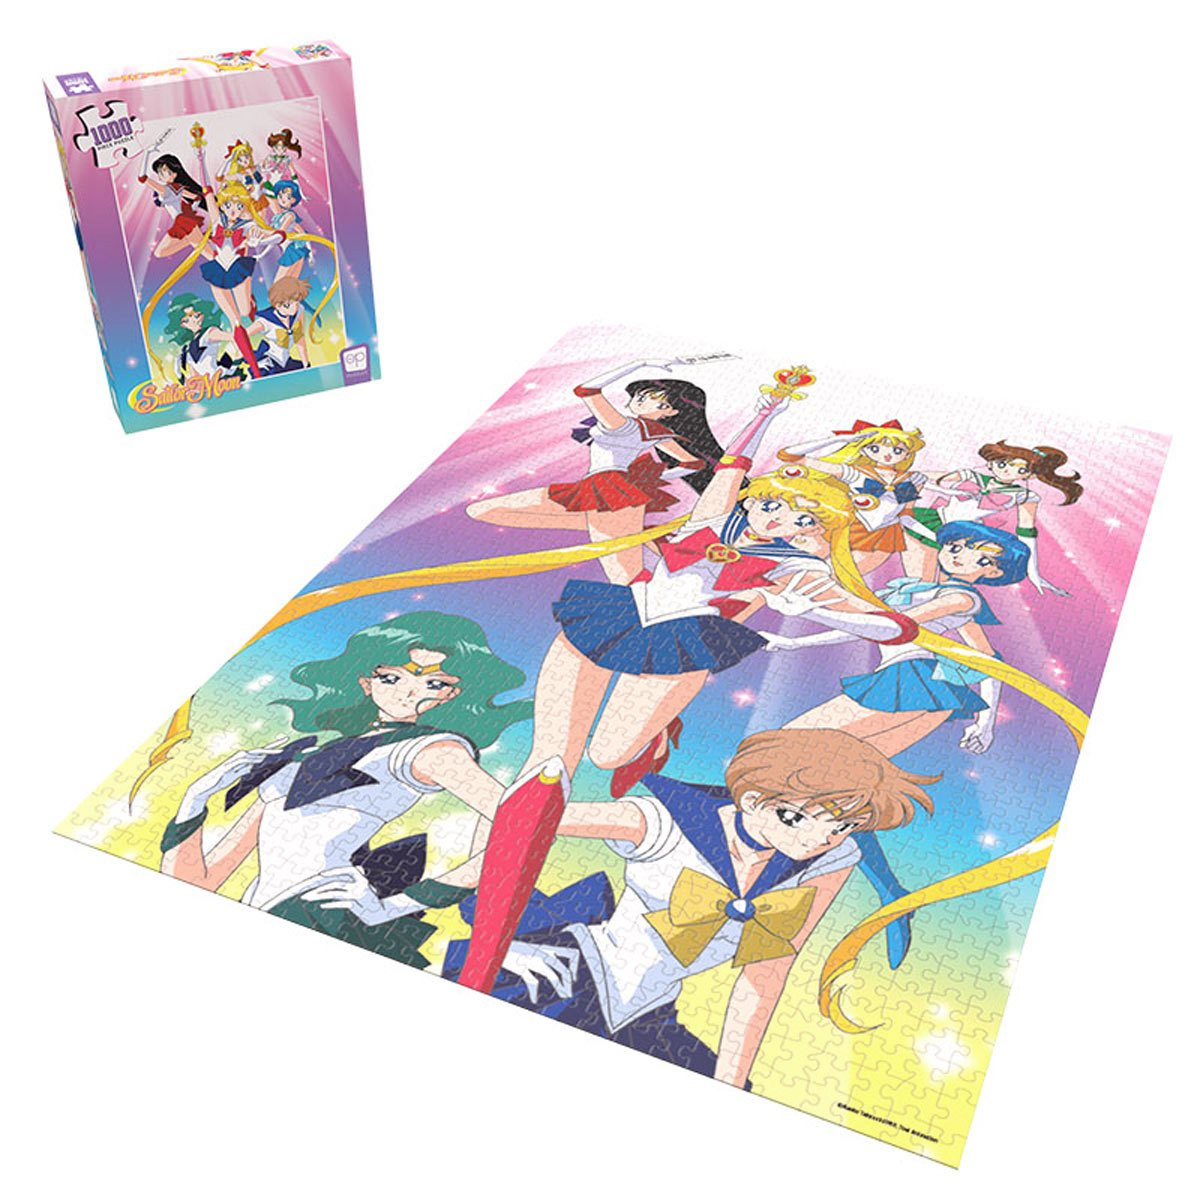 Sailor Moon Puzzle with 7 Sailor Guardians and 1,000 pieces